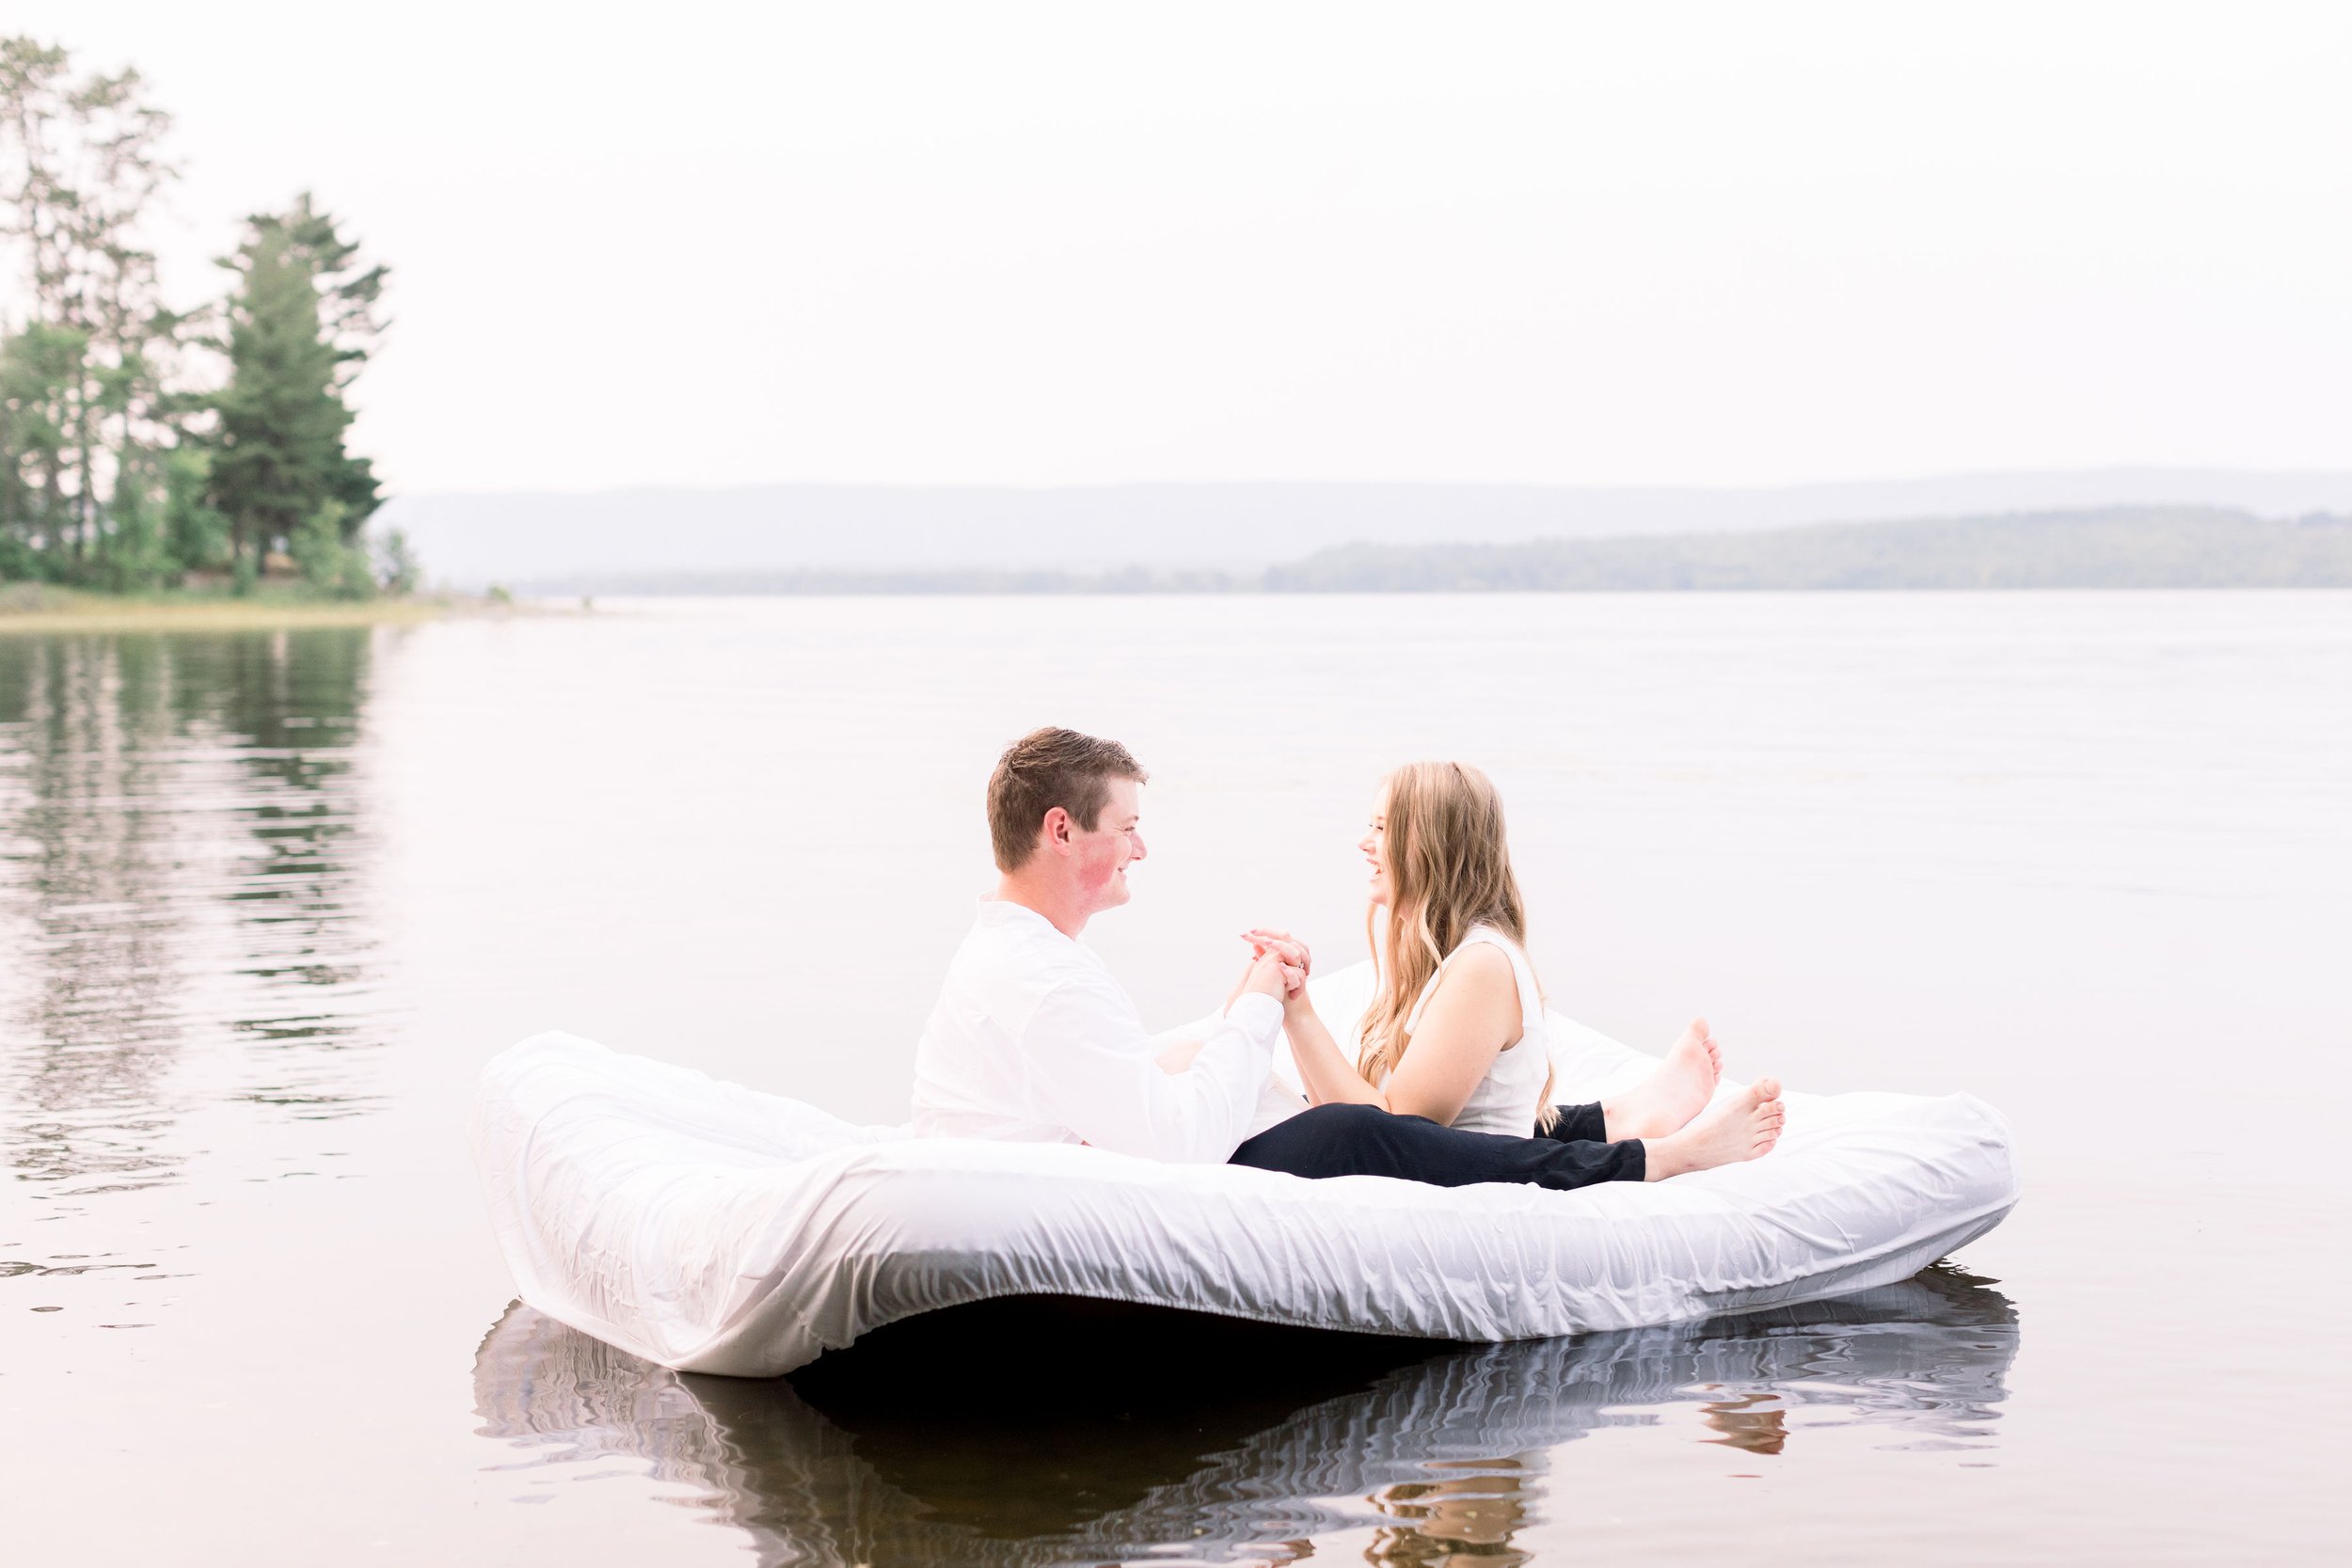  At Pinhey's Point, an engaged couple sits on a mattress on the lake by Chelsea Mason photography. Pinhey's Point engagements Ottawa #ChelseaMasonPhotography #ChelseaMasonEngagements #PinheysPointEngagements #OttawaEngagementPhotography 